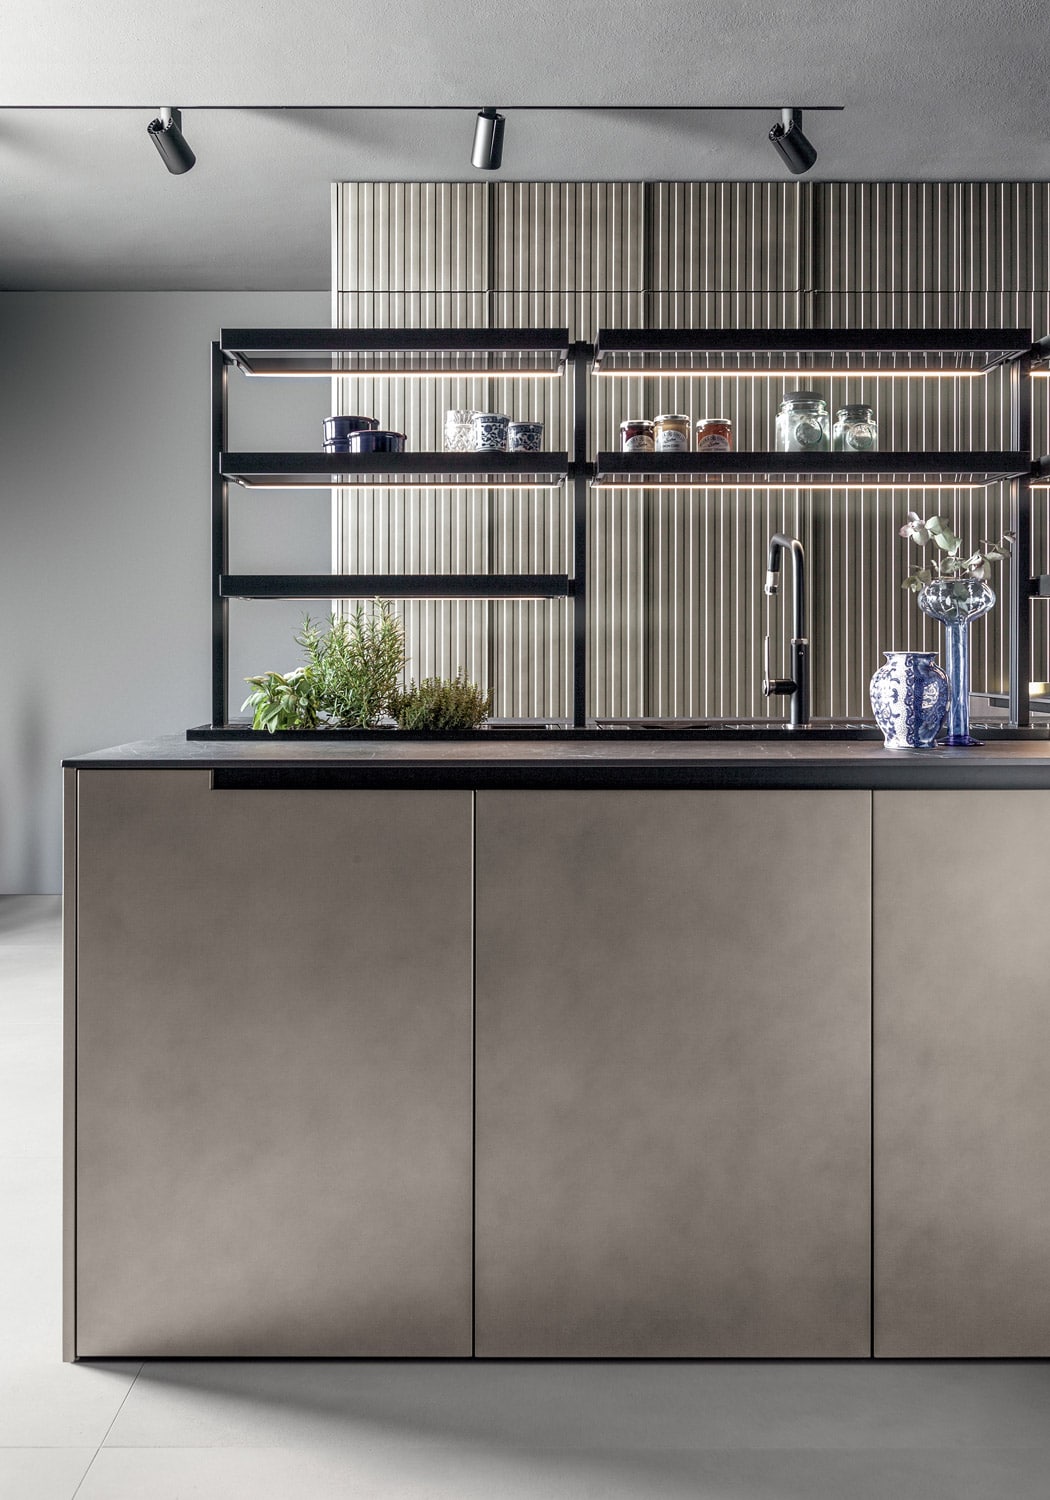 On the island, the customized open storage system features lit glass shelves with profiles in black anodized aluminum.